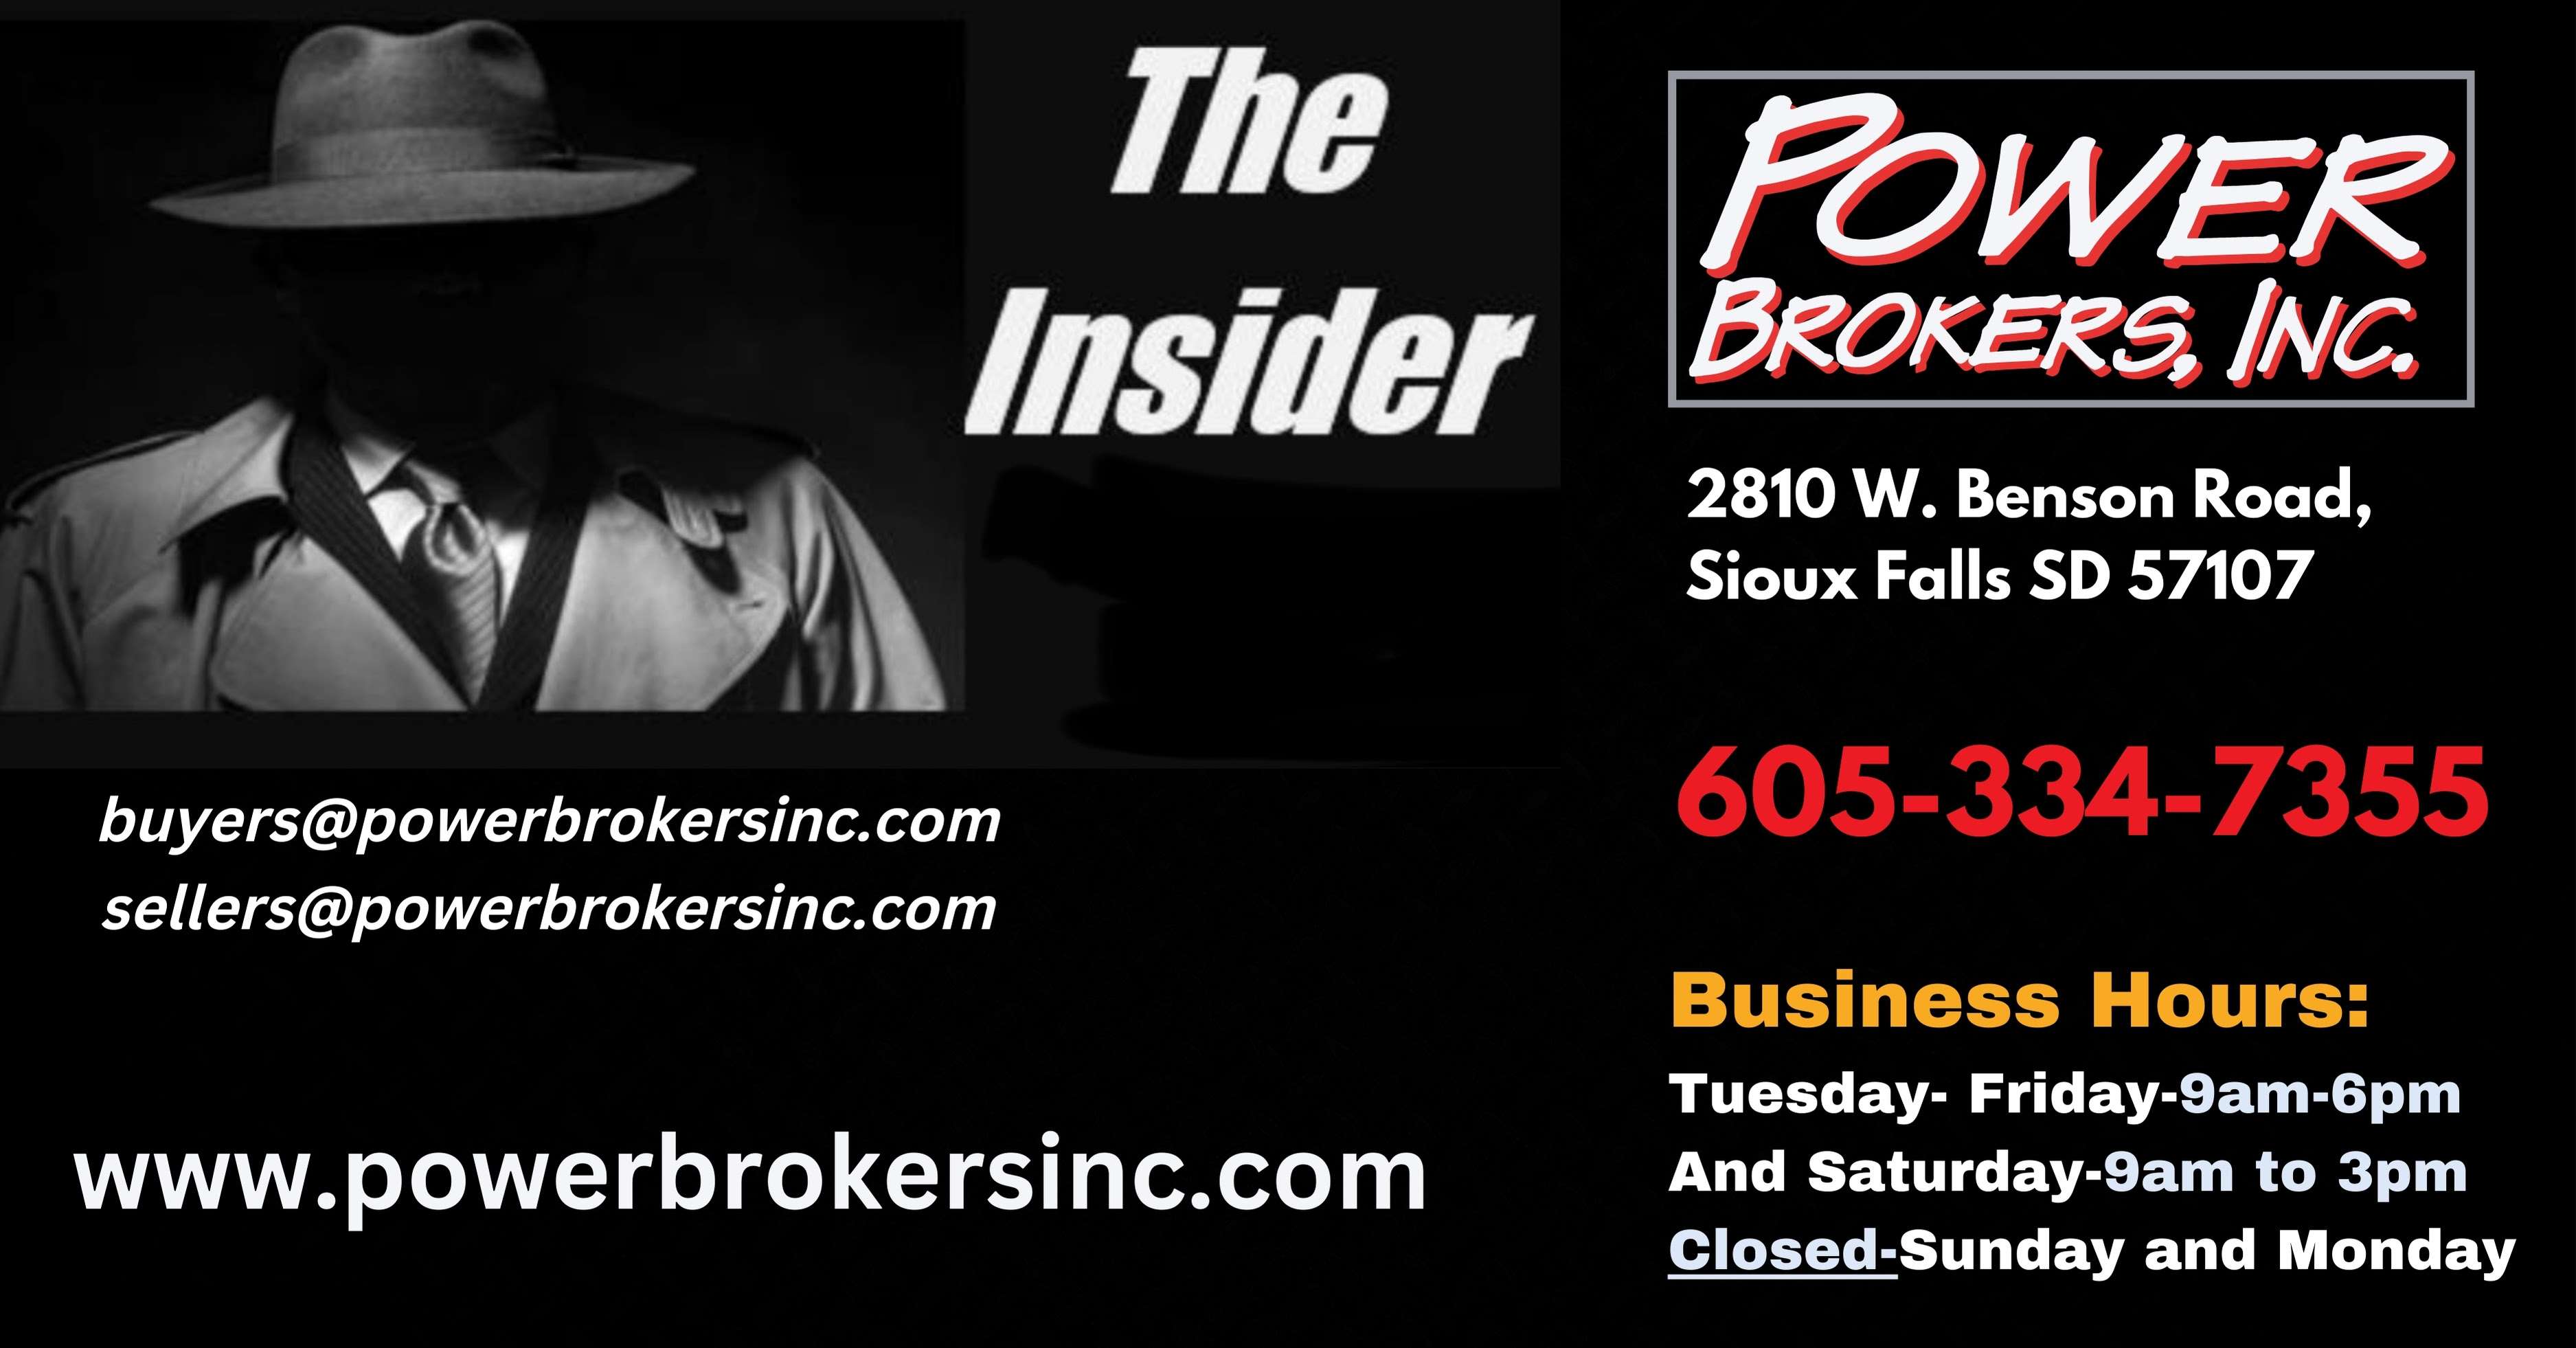 Join the Insider